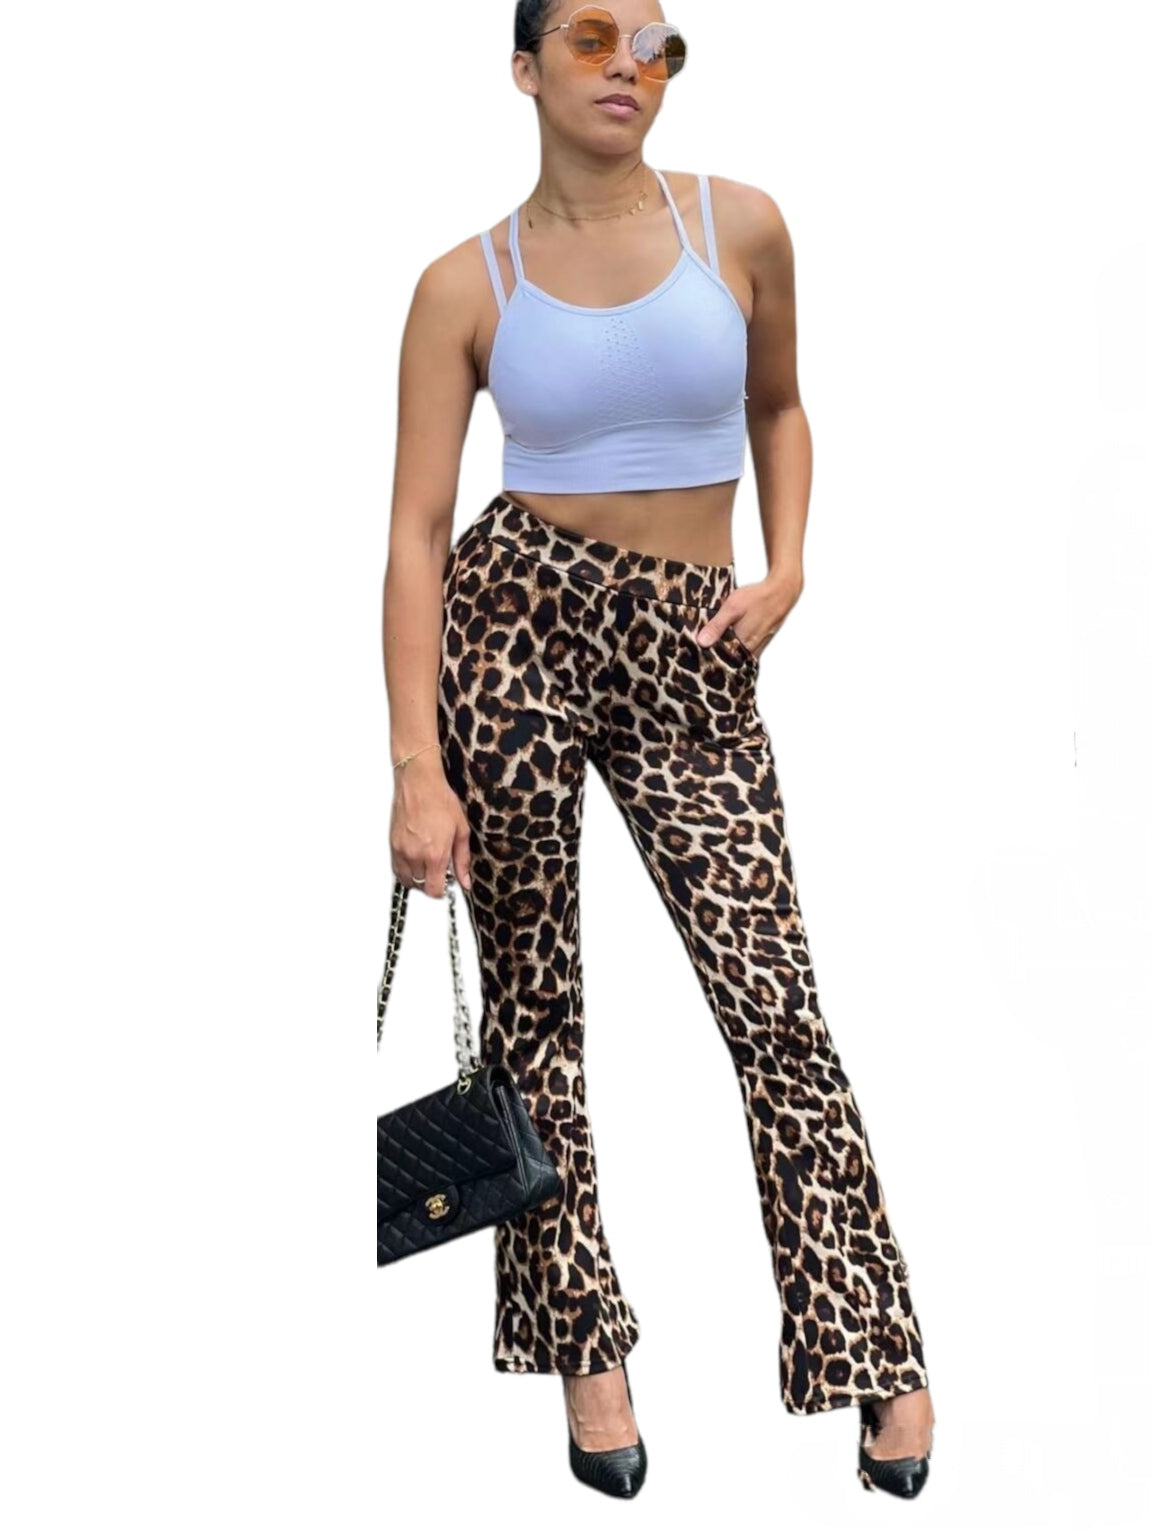 Plain color pants free at the bottom Leopard pattern (x12)